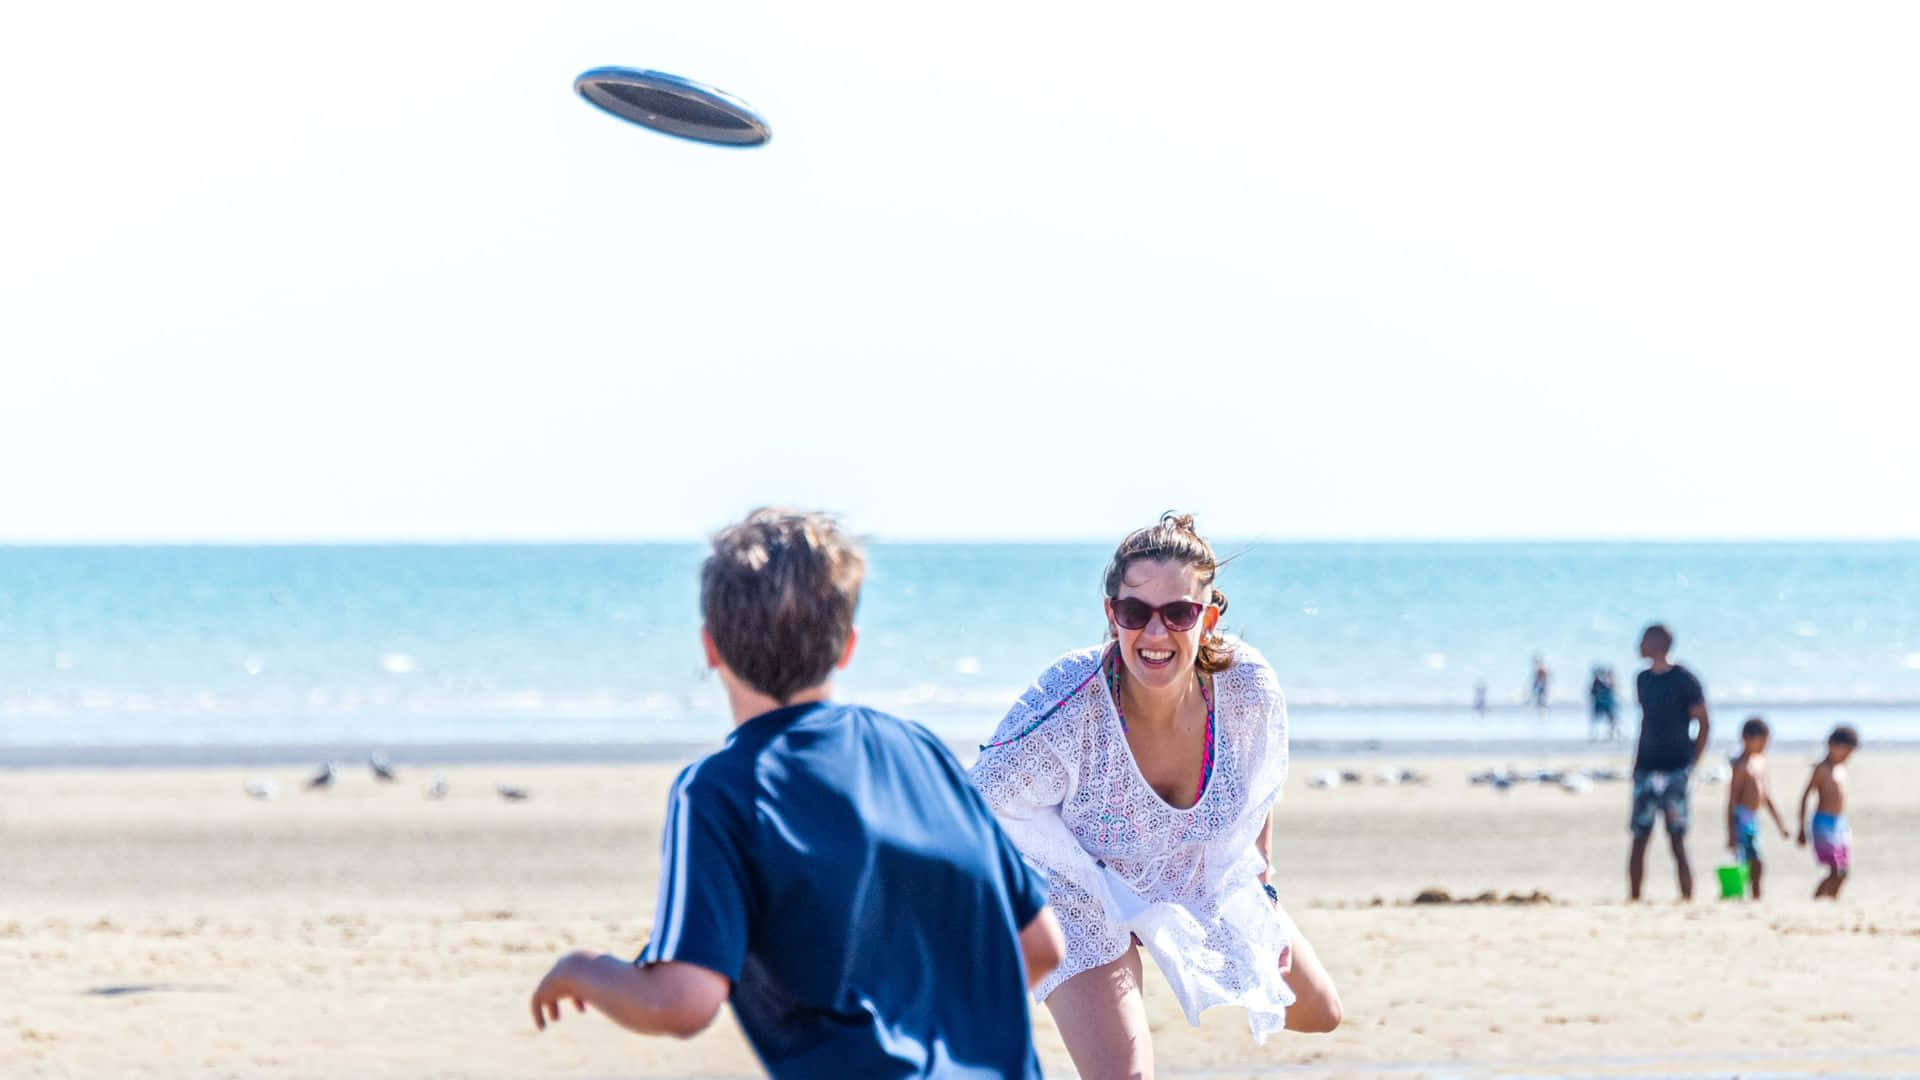 Try Your Hand at Making a Frisbee Fly